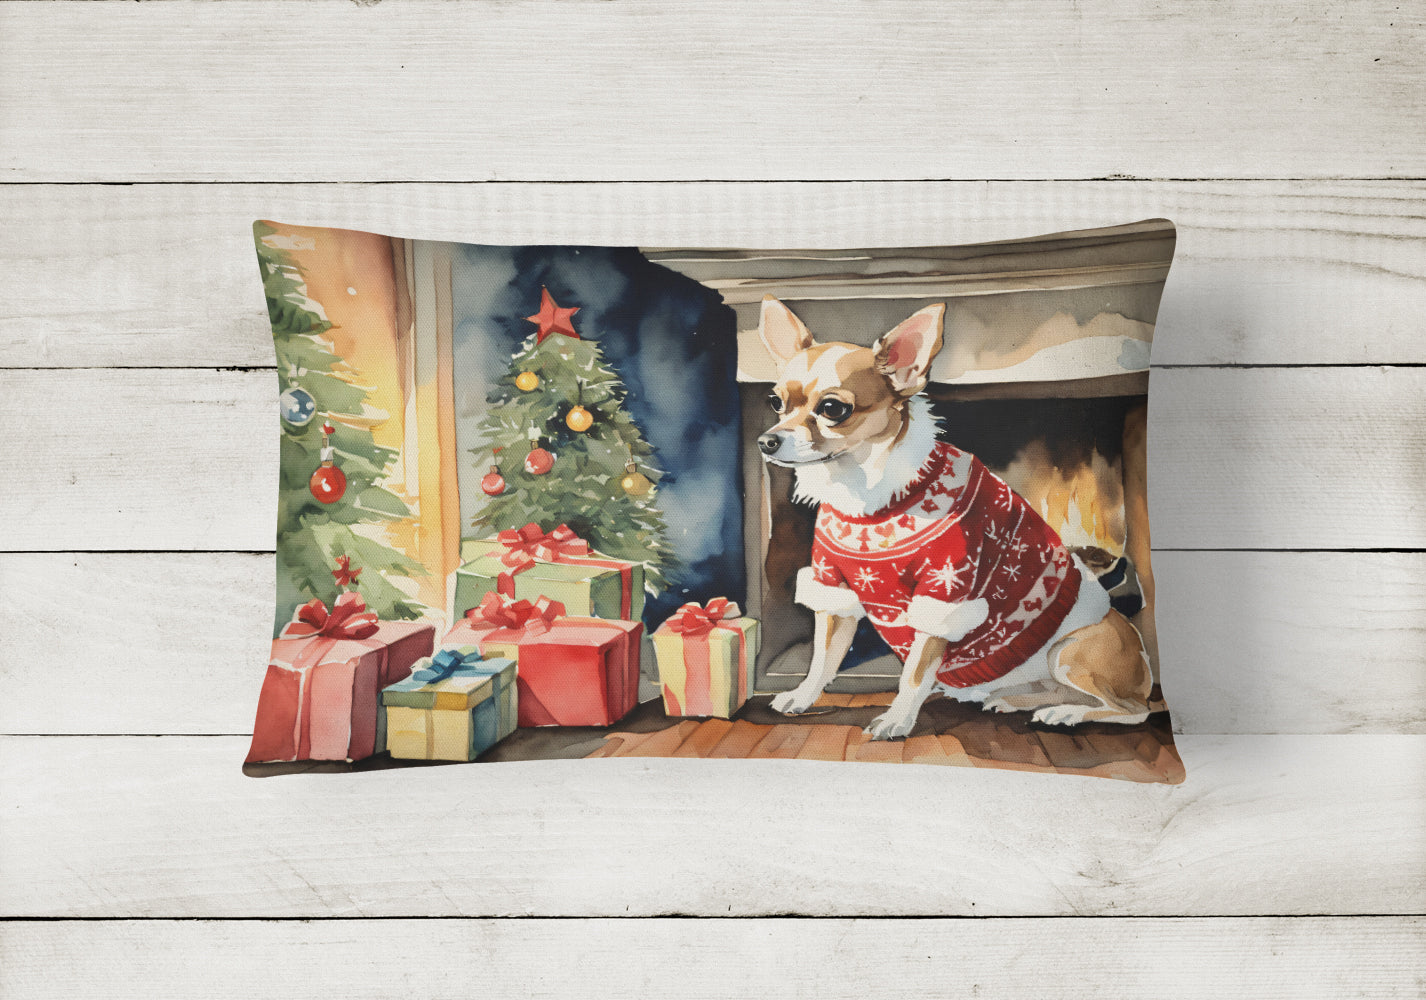 Buy this Chihuahua Christmas Fabric Decorative Pillow